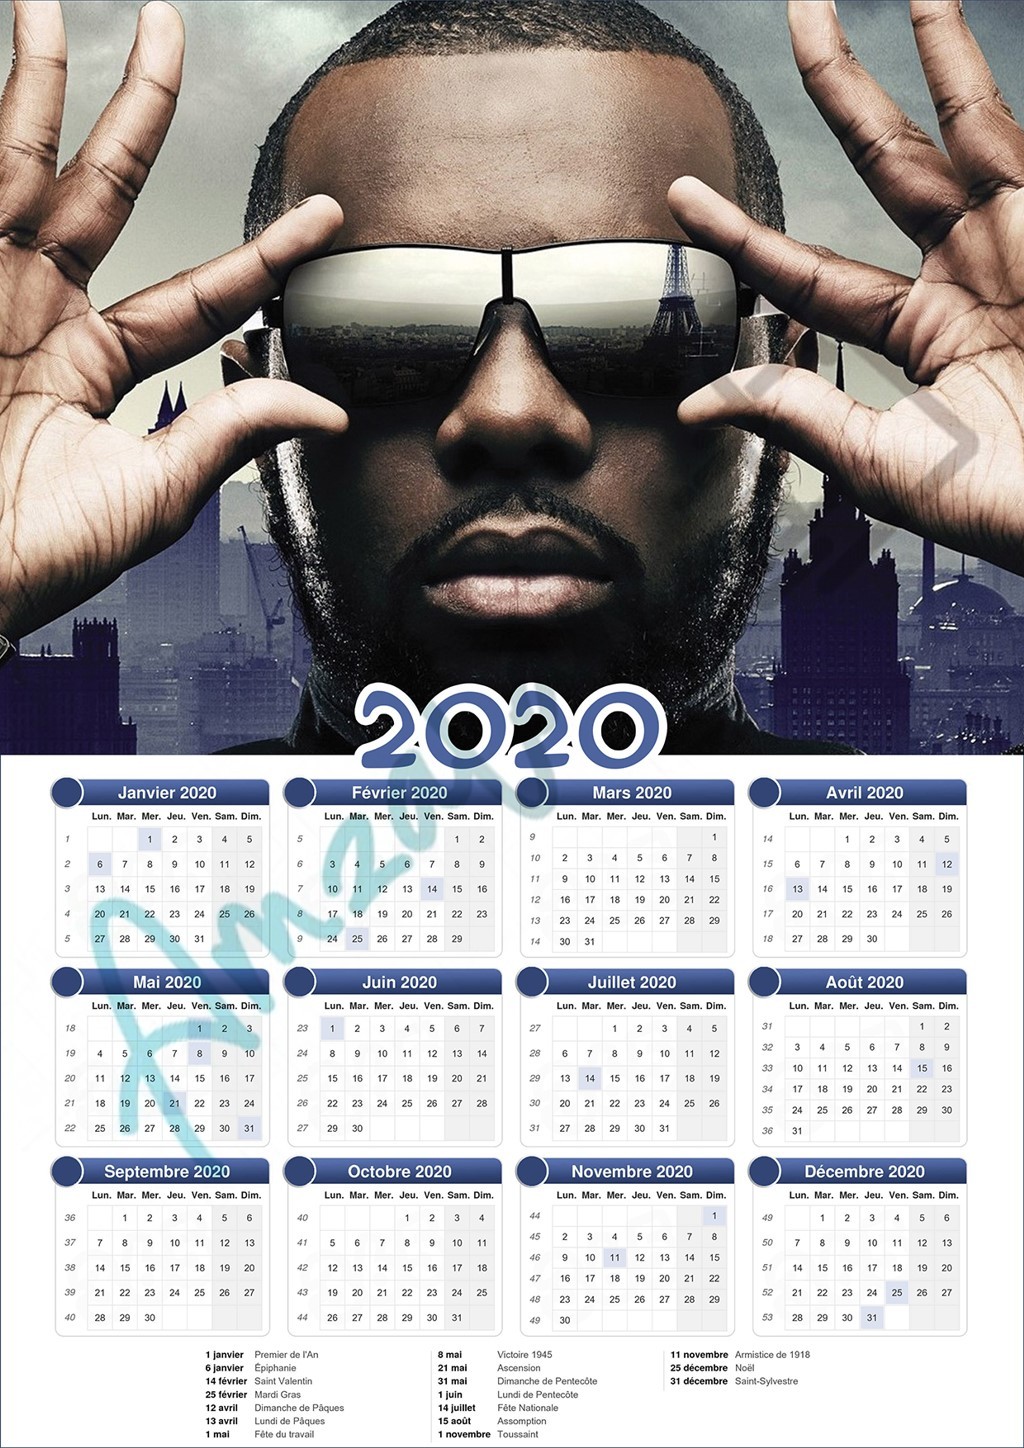 Calendrier collection STAR MAITRE GIMS V1